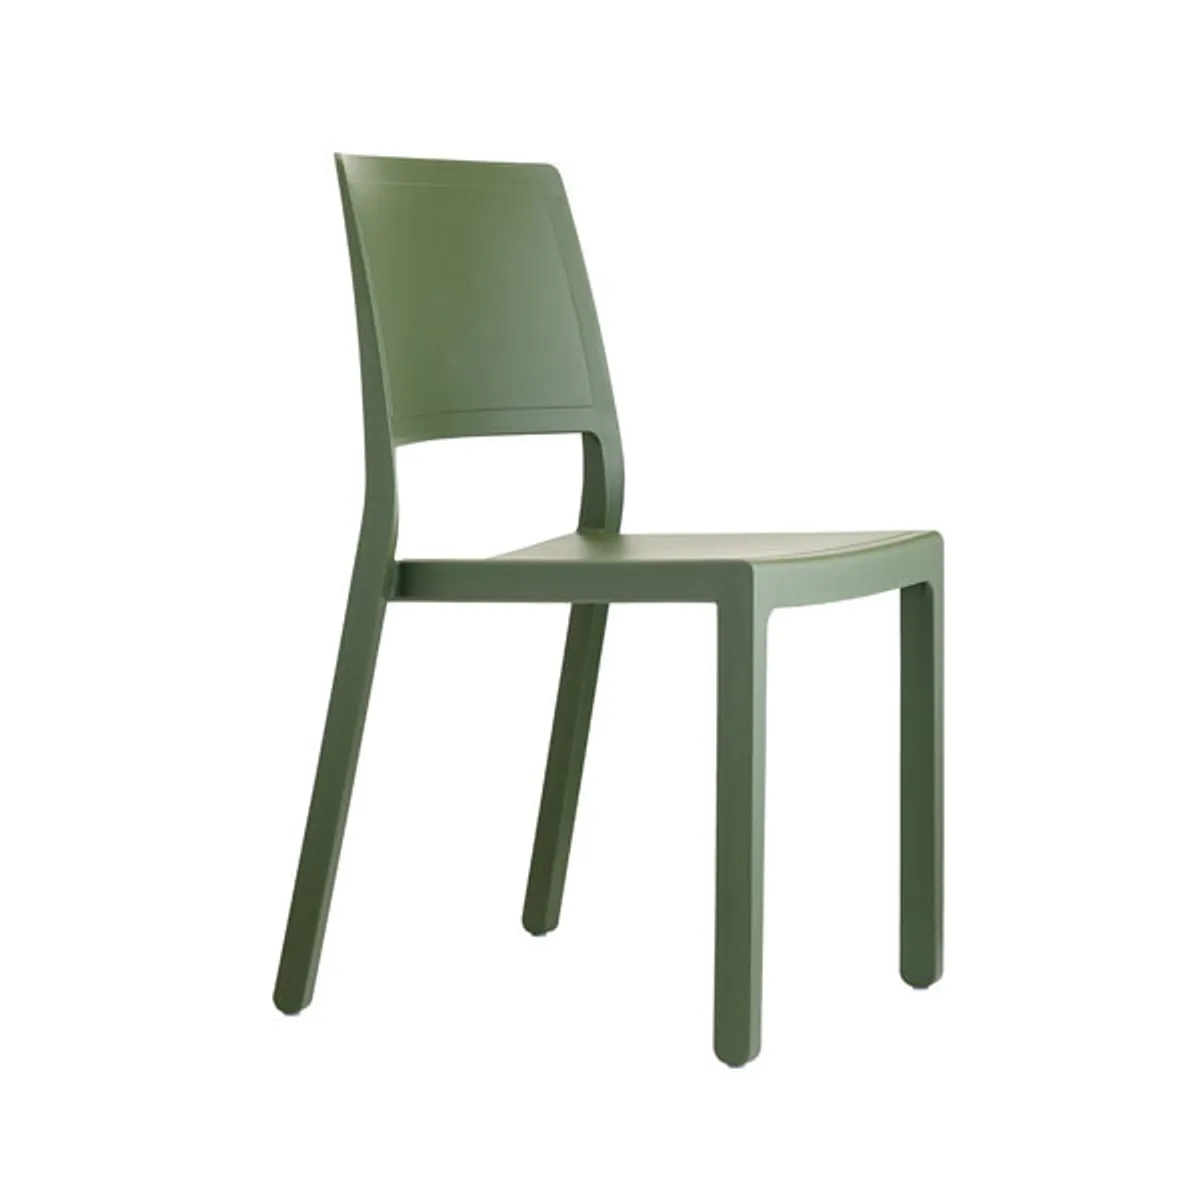 Remi side chair 6 Inside Out Contracts